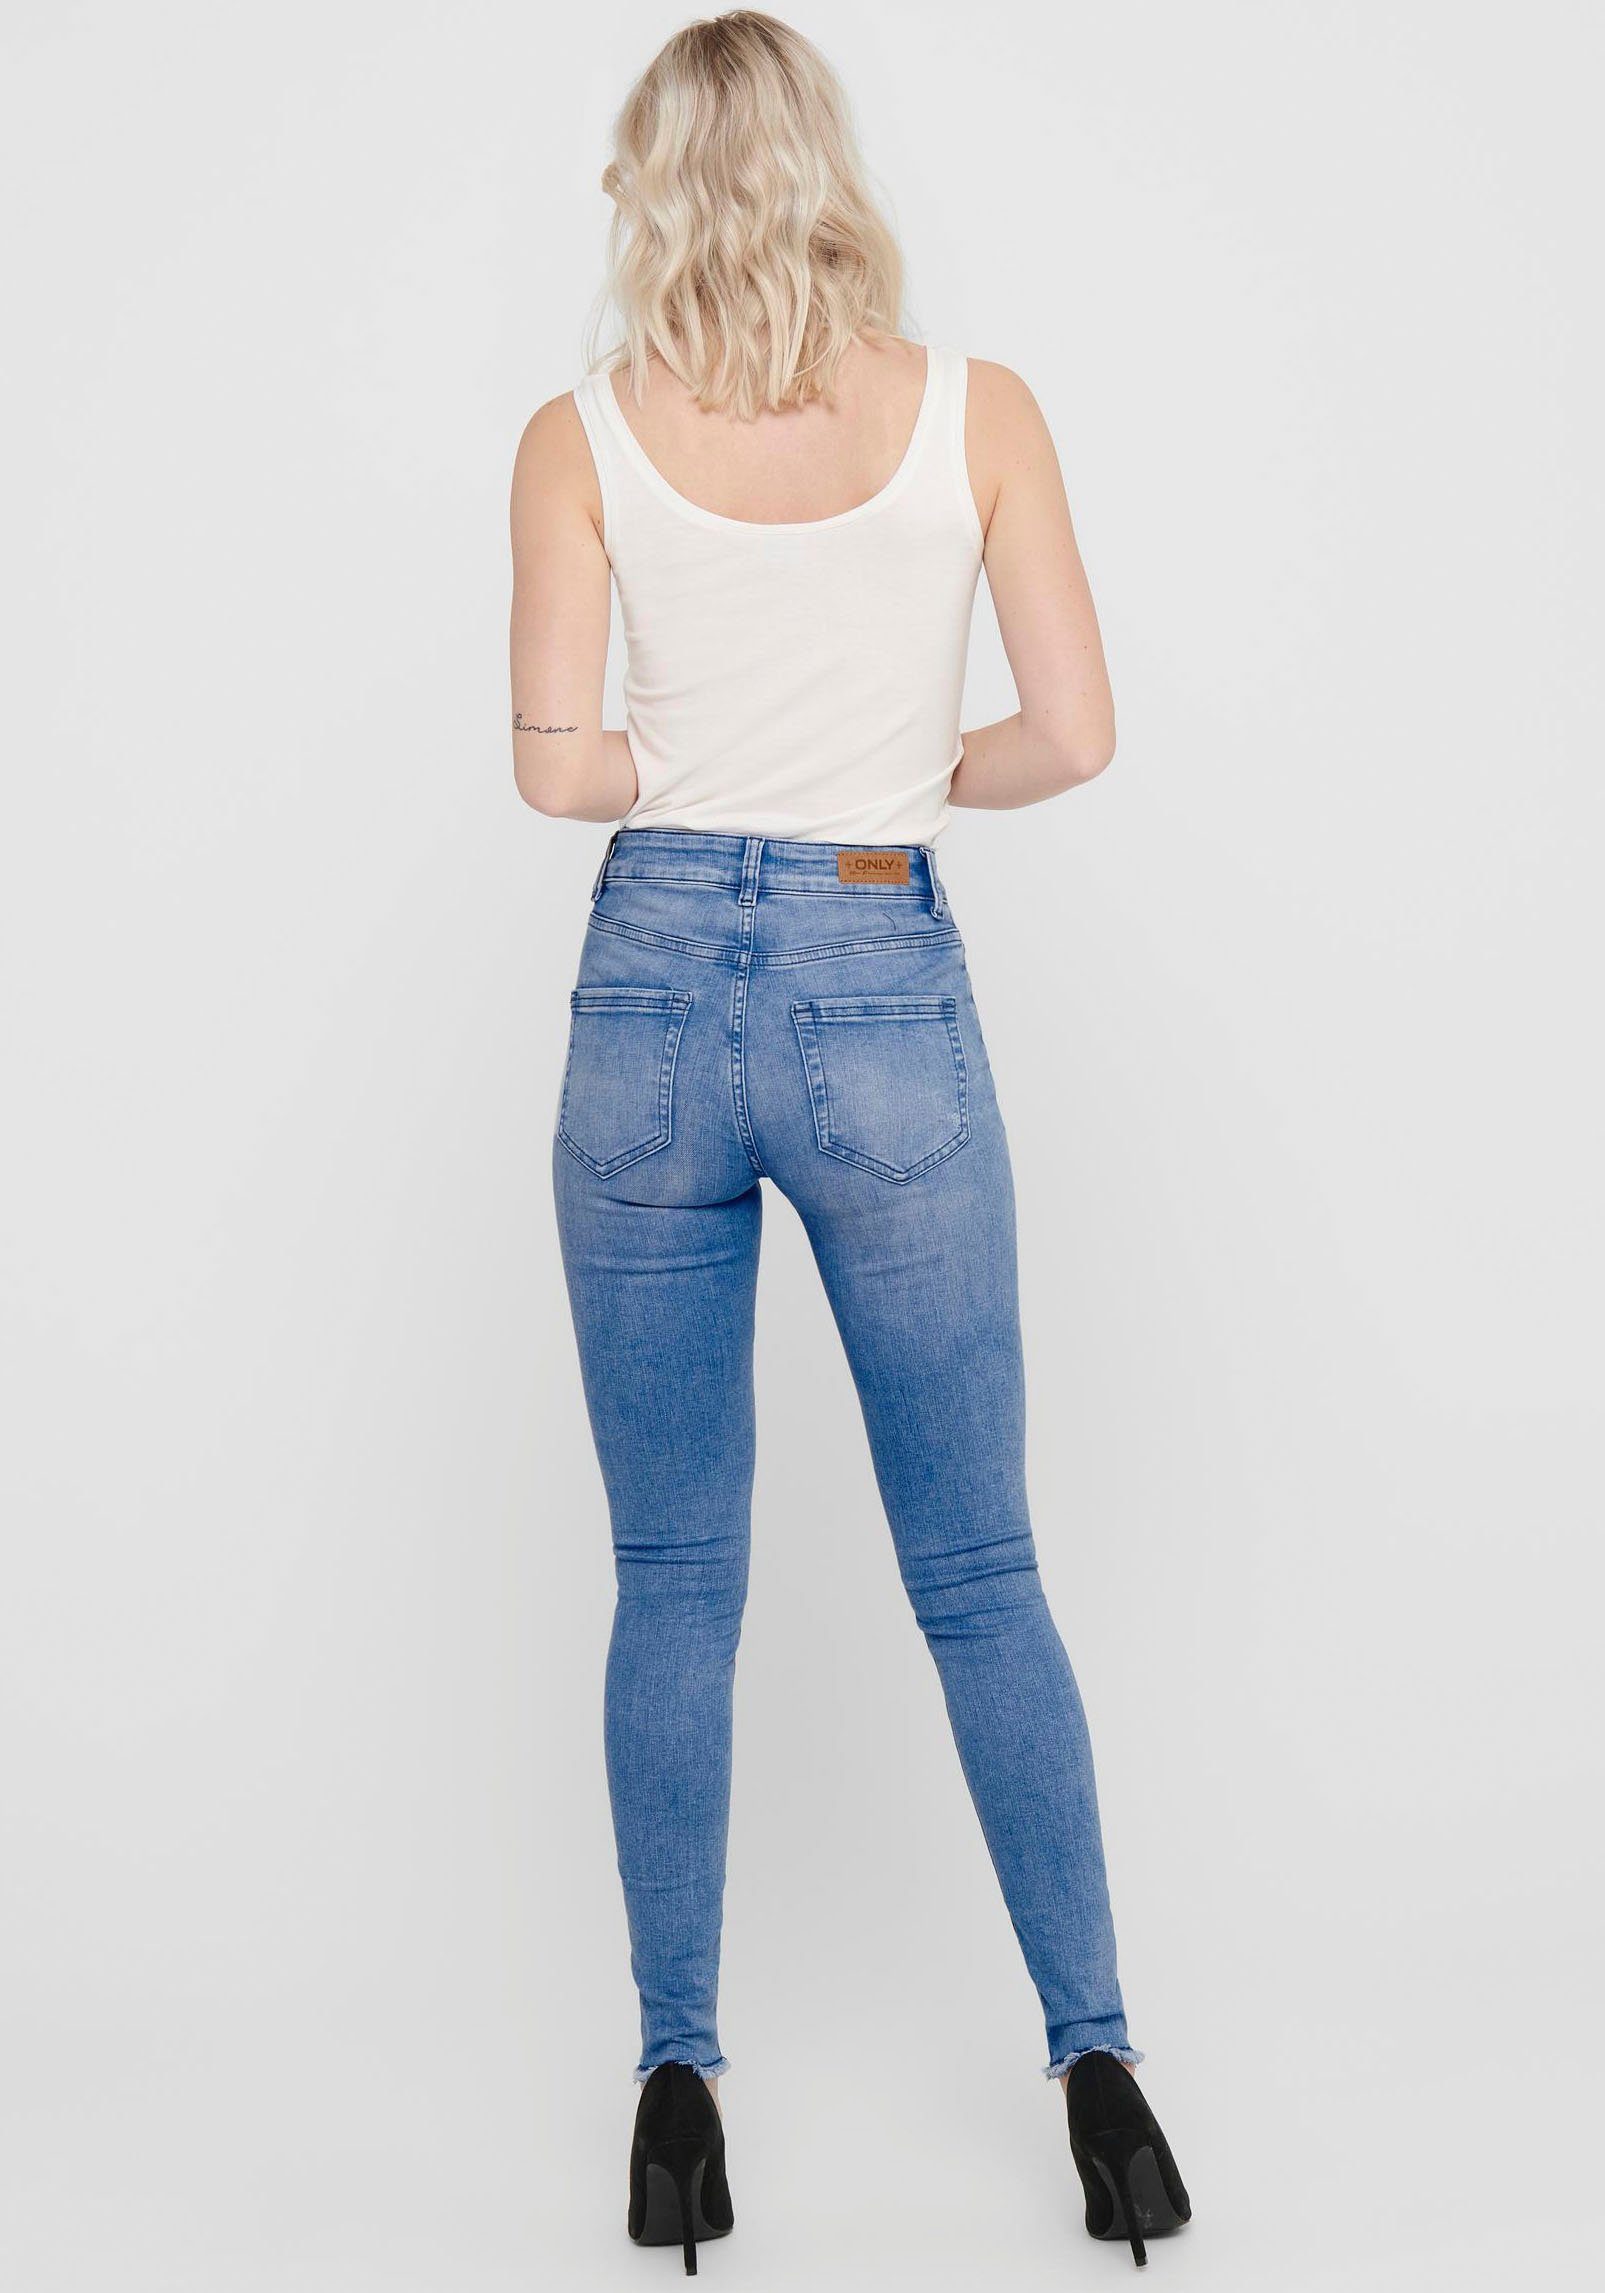 ONLY ONLBLUSH Hellblau Skinny-fit-Jeans LIFE